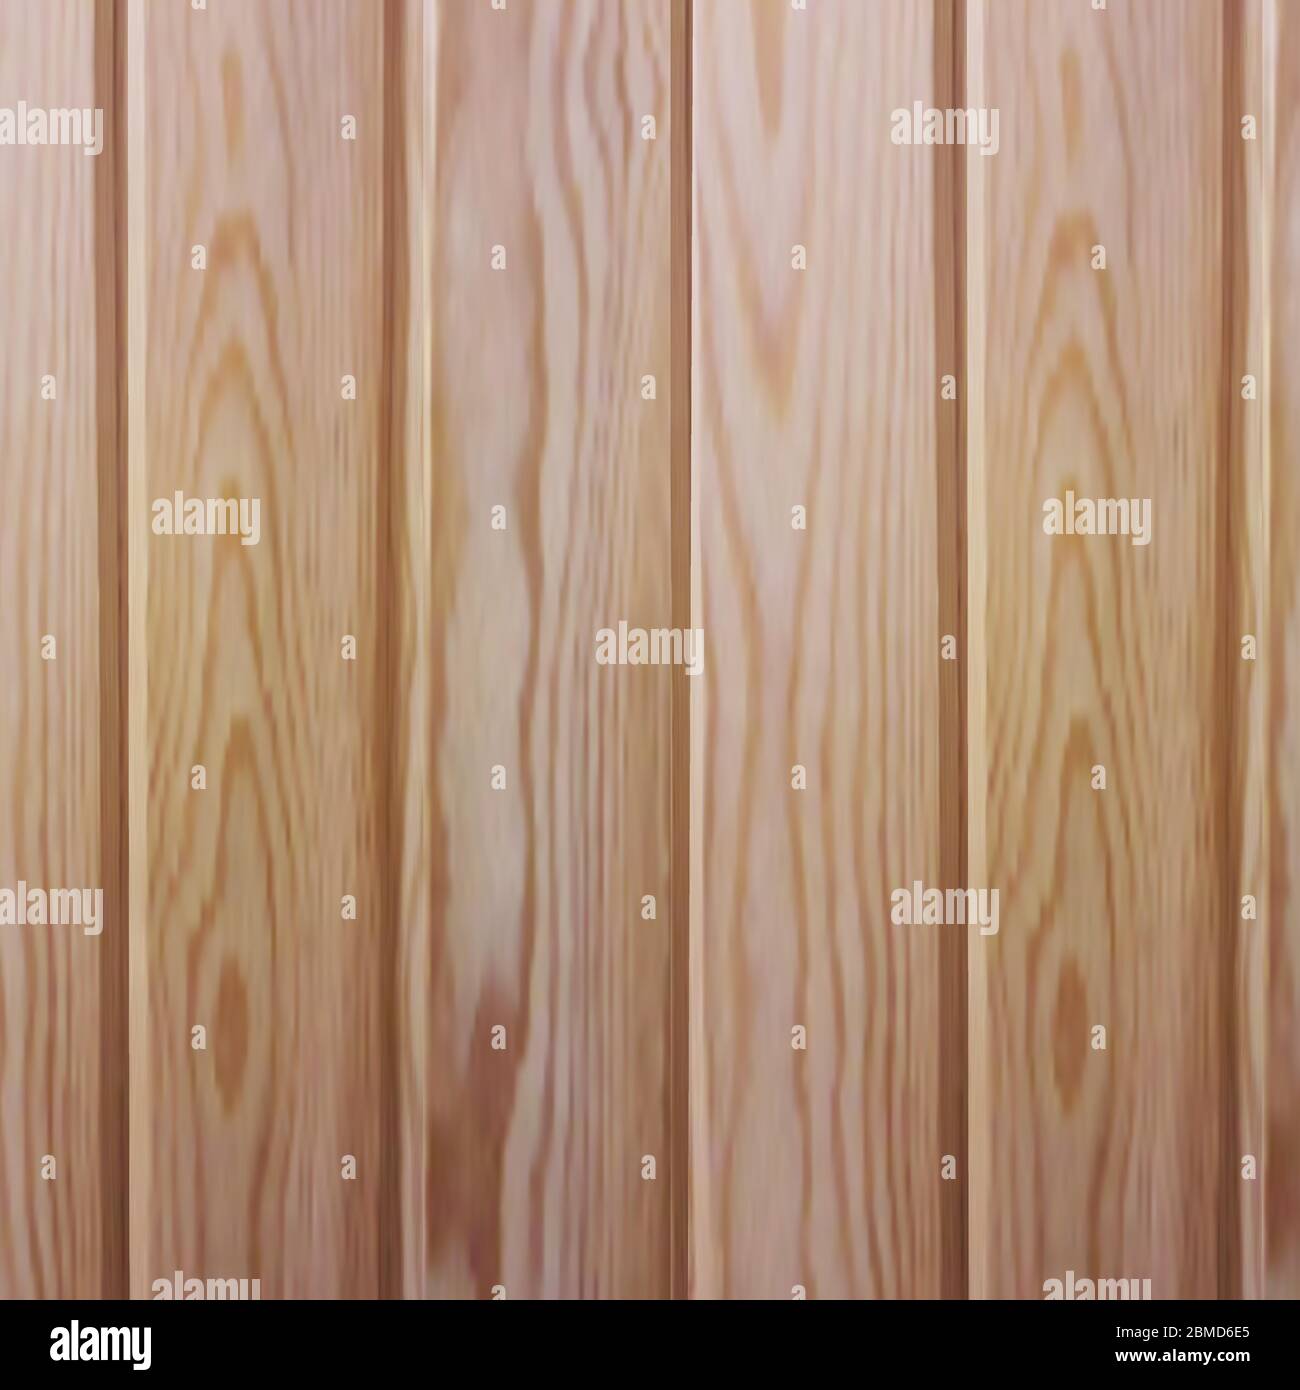 Vector wooden planks in the style of realism. Environmentally friendly lining for saunas and steam rooms. Background from boards with a wooden texture Stock Vector